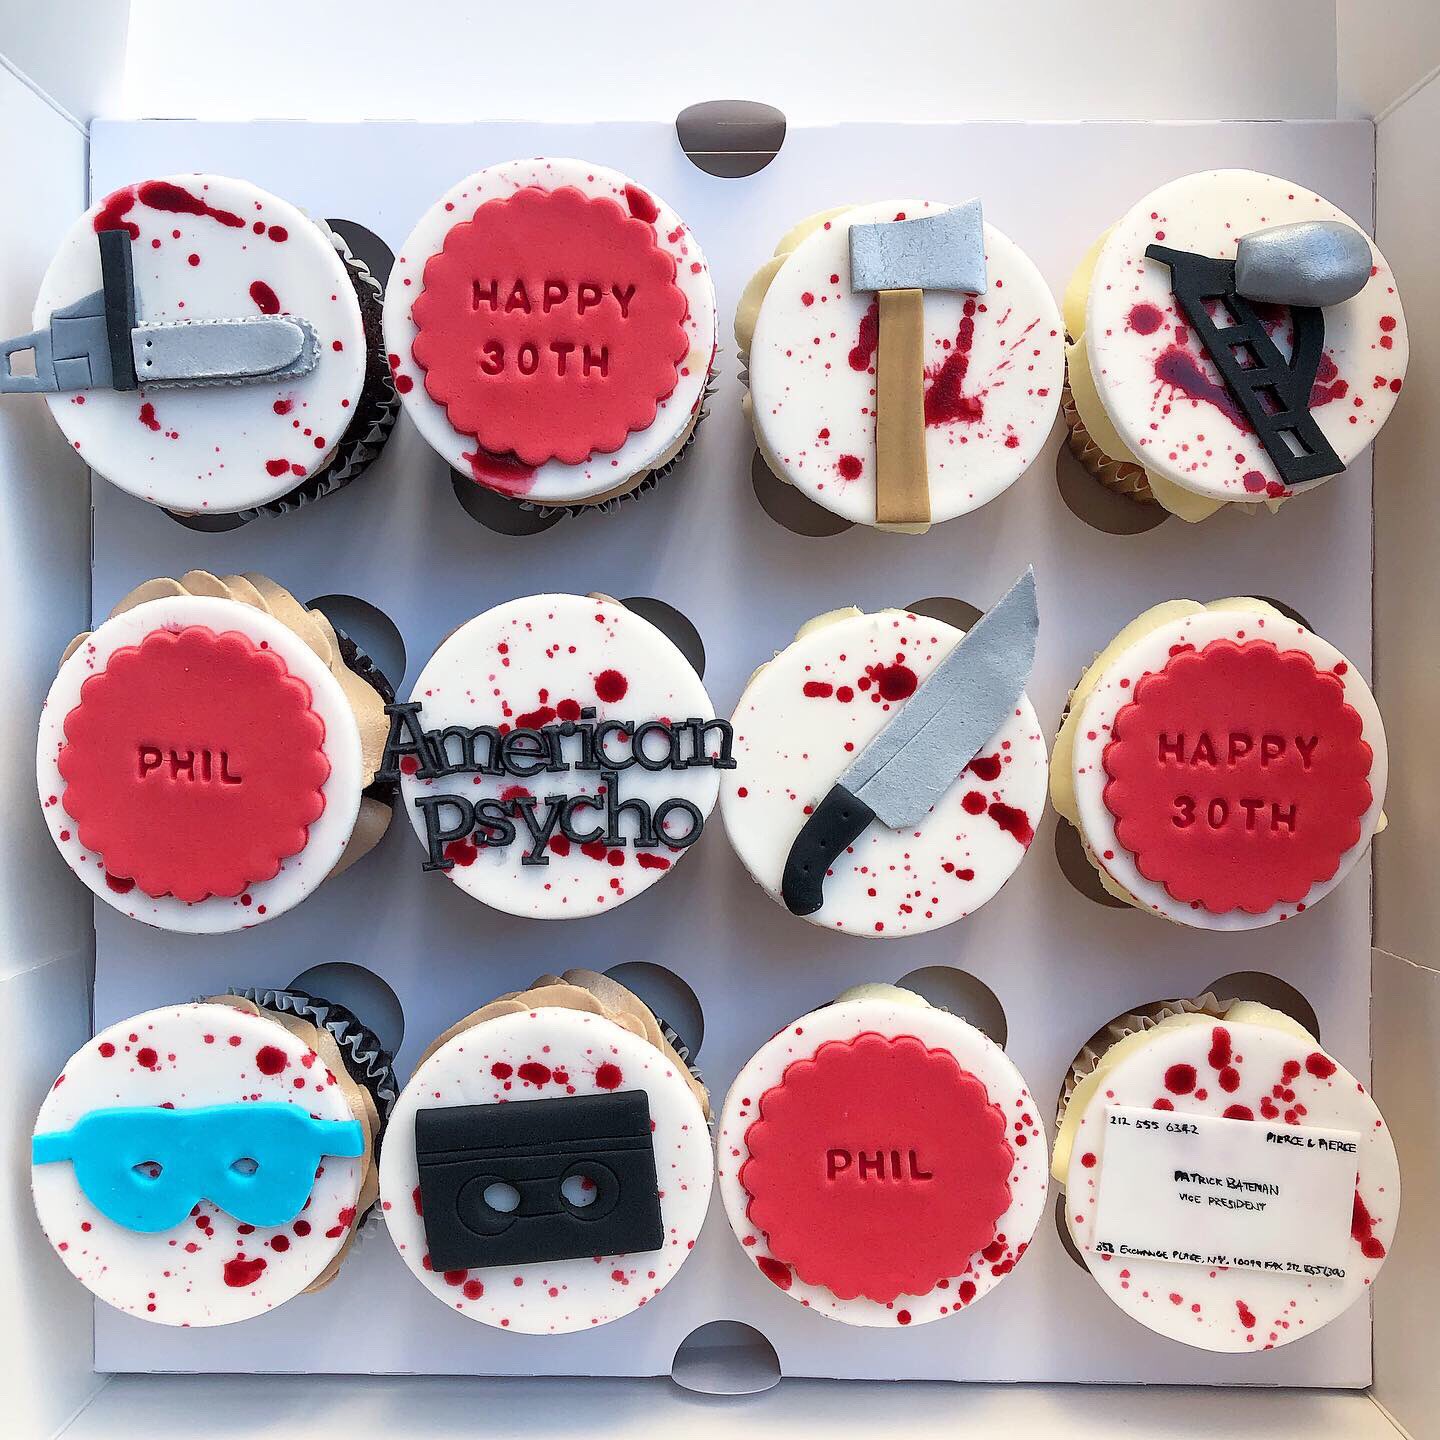 Twitter 上的Adam & Abi Cakes："American Psycho cupcakes for Phil's 30th 🔪🔫🔨⚰️📼 @RhyannonParry @PhilParton #americanpsycho #americanpsychocupcakes #christianbale #cupcakes #bespokecupcakes #cake # cakes #sthelenscakes #liverpoolcakes https://t.co ...